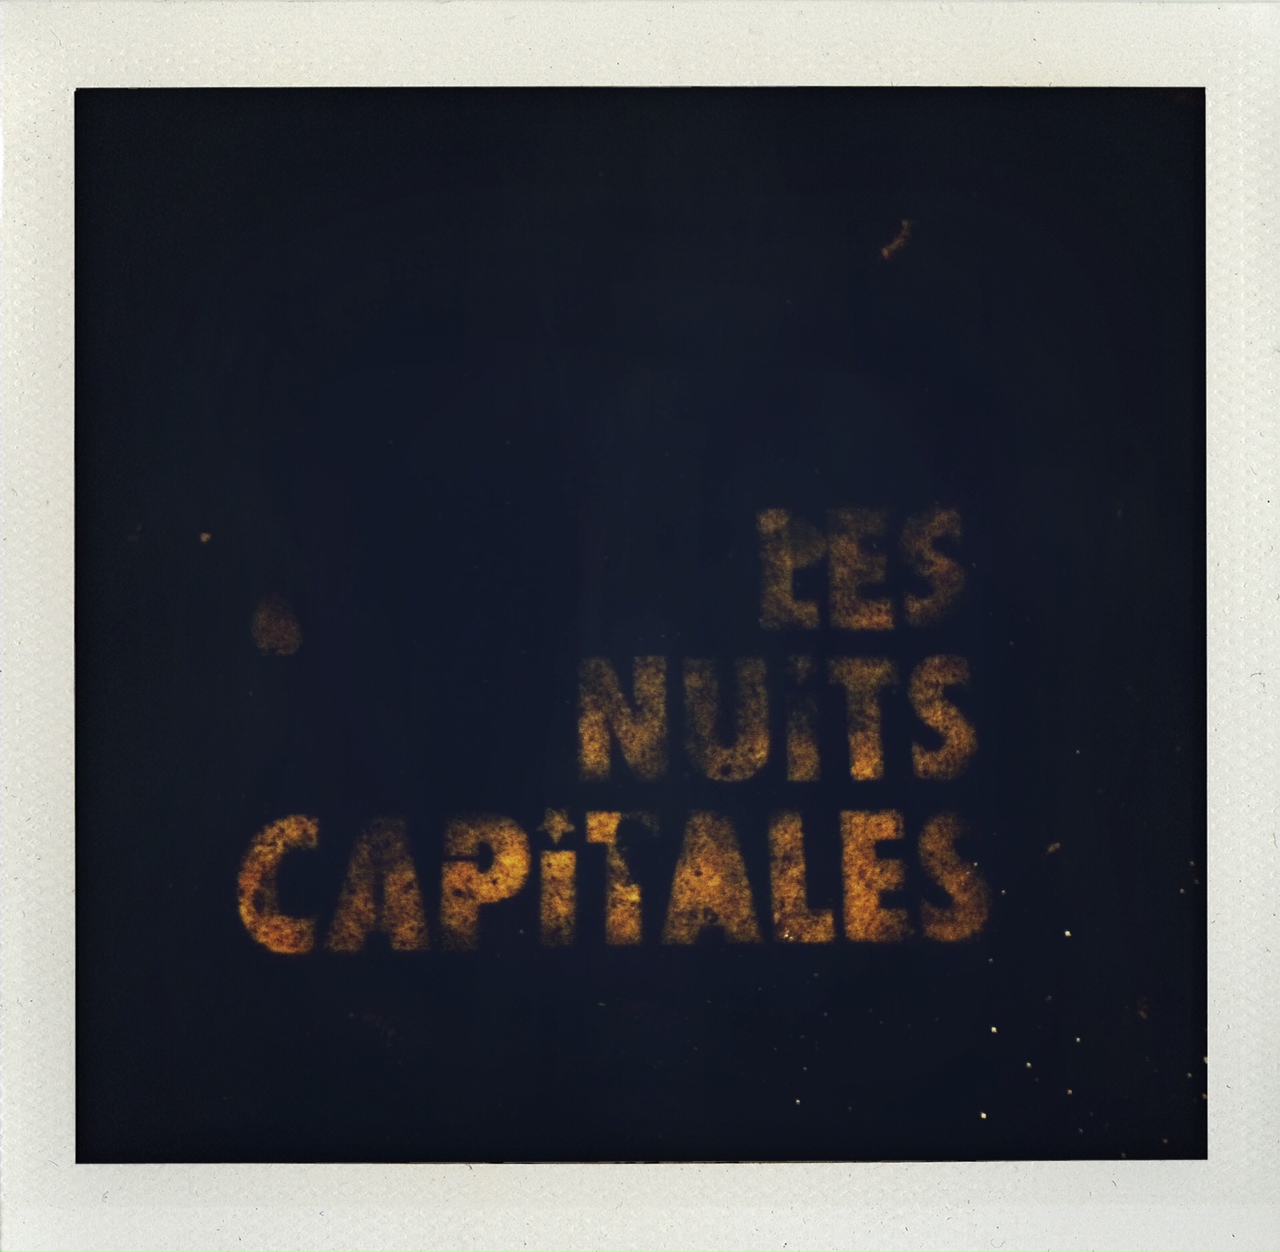 Nuits capitales